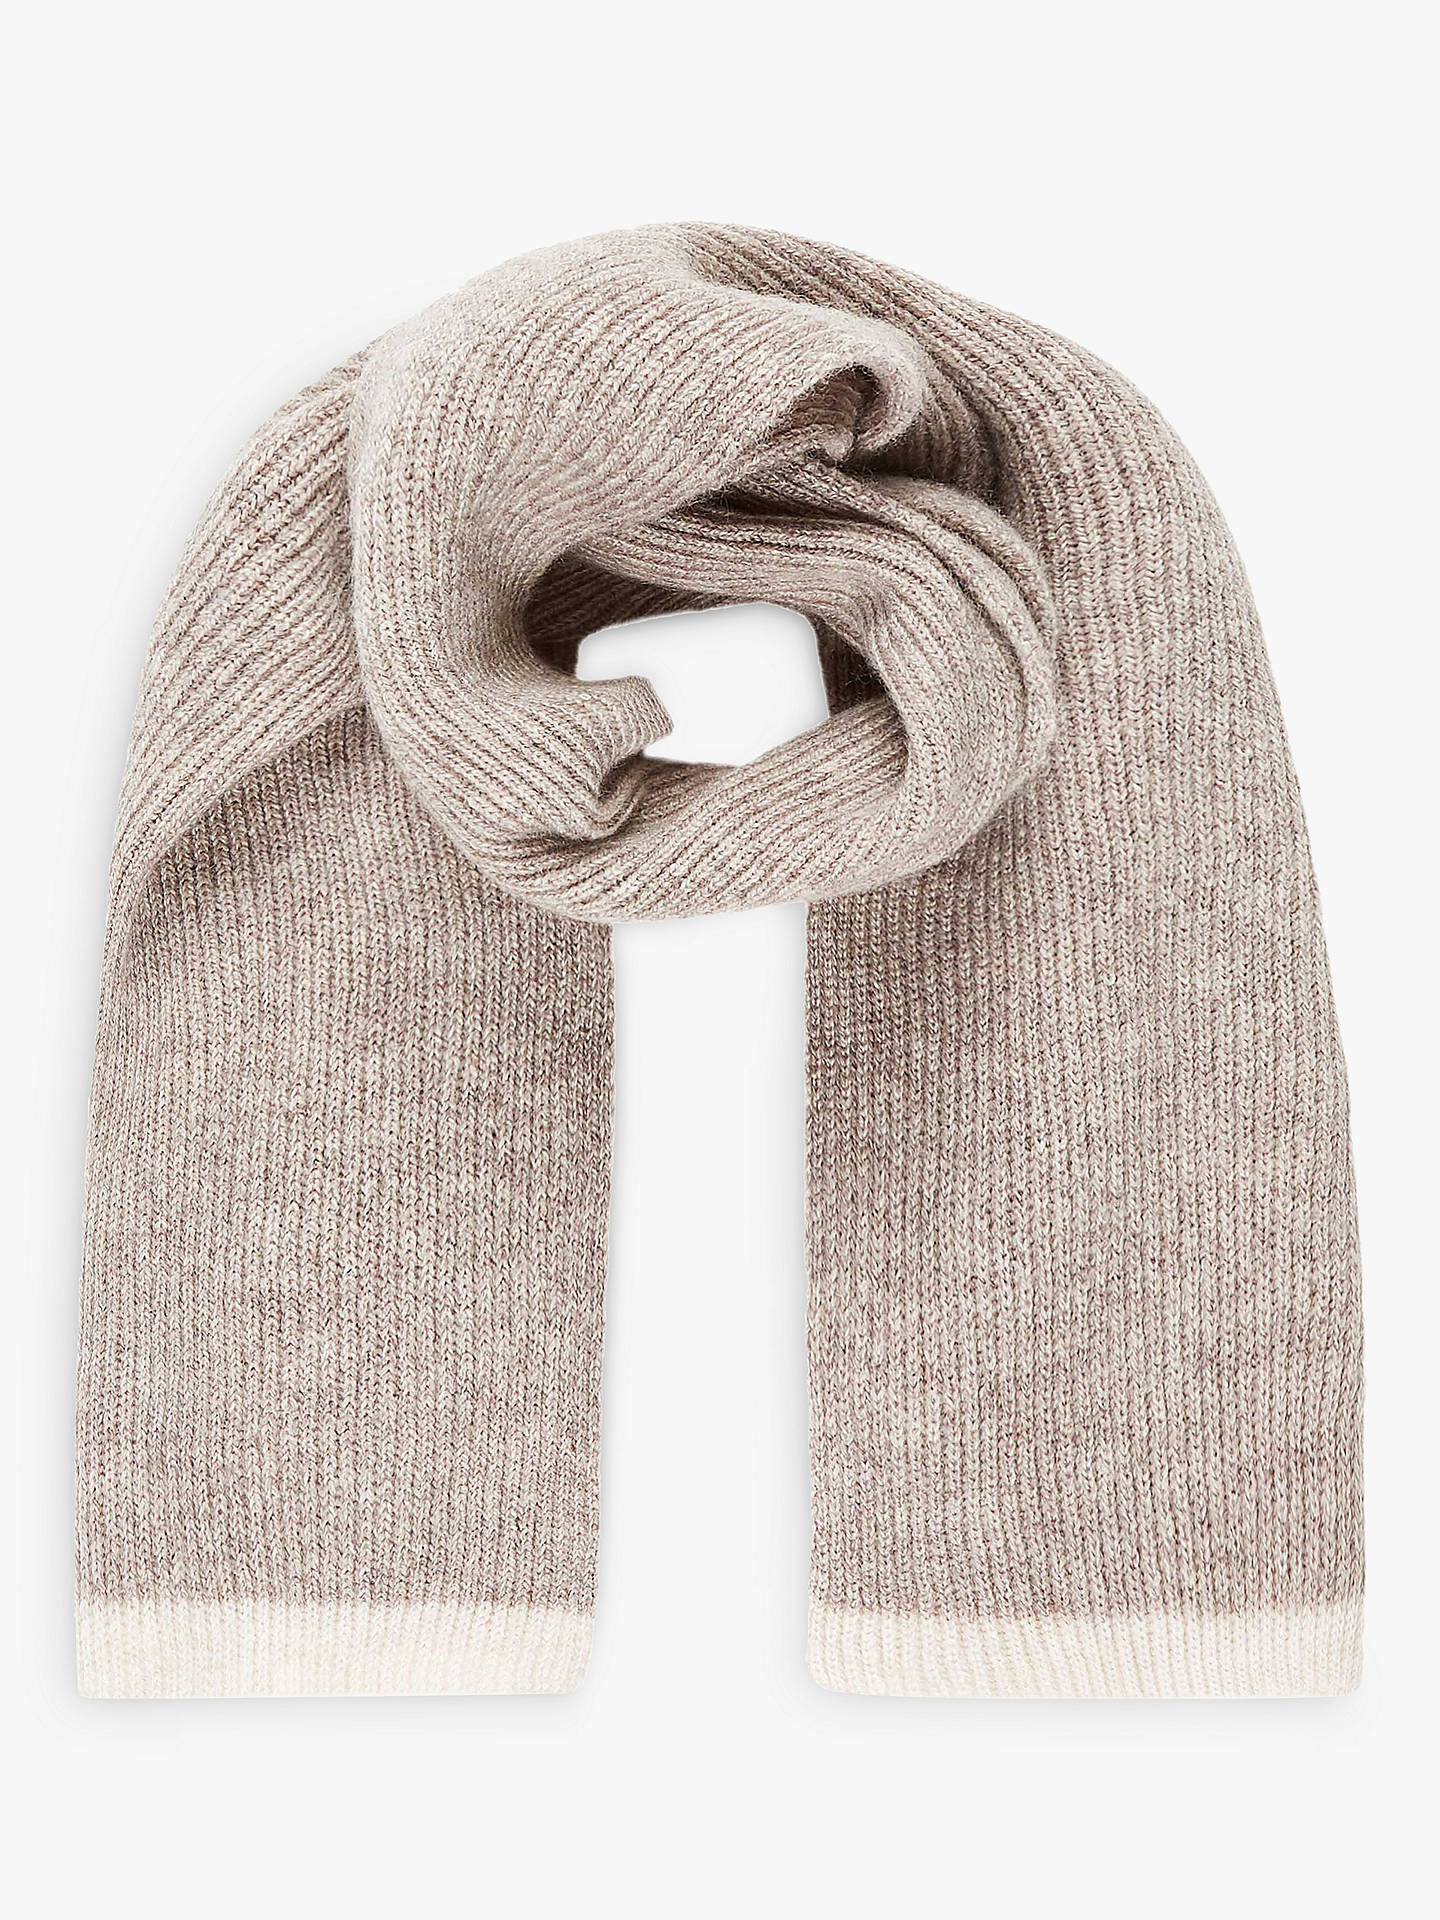 Brora Cashmere Ribbed Throat Warmer Scarf at John Lewis & Partners